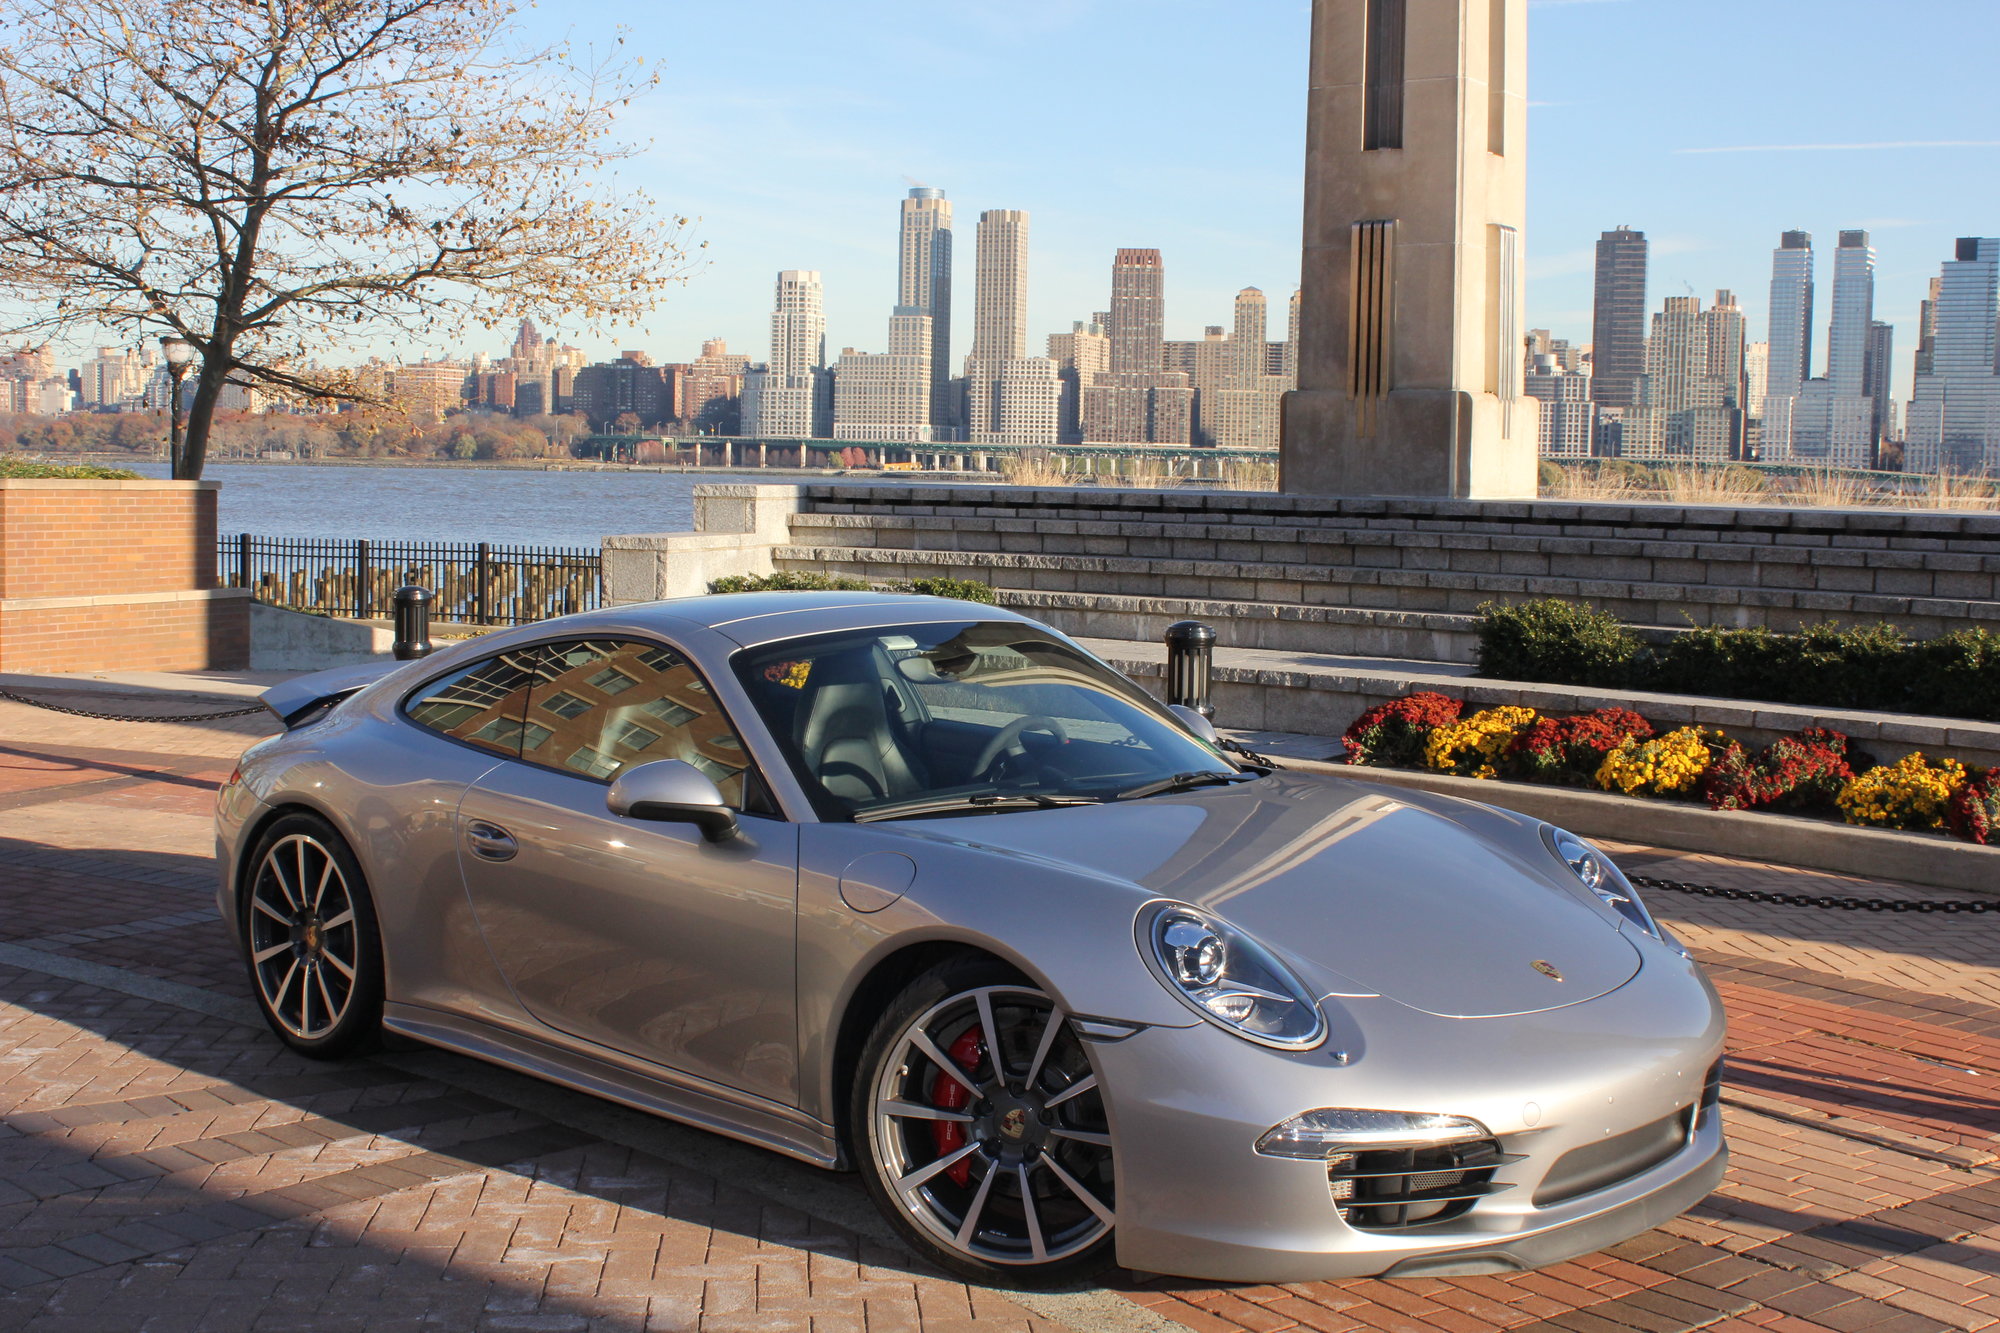 2012 Porsche 911 - Porsche 911 Carrera S (991.1) For Sale 22k Miles - Used - VIN WP0AB2A92CS121841 - 22,678 Miles - 6 cyl - 2WD - Manual - Coupe - West New York, NJ 07093, United States